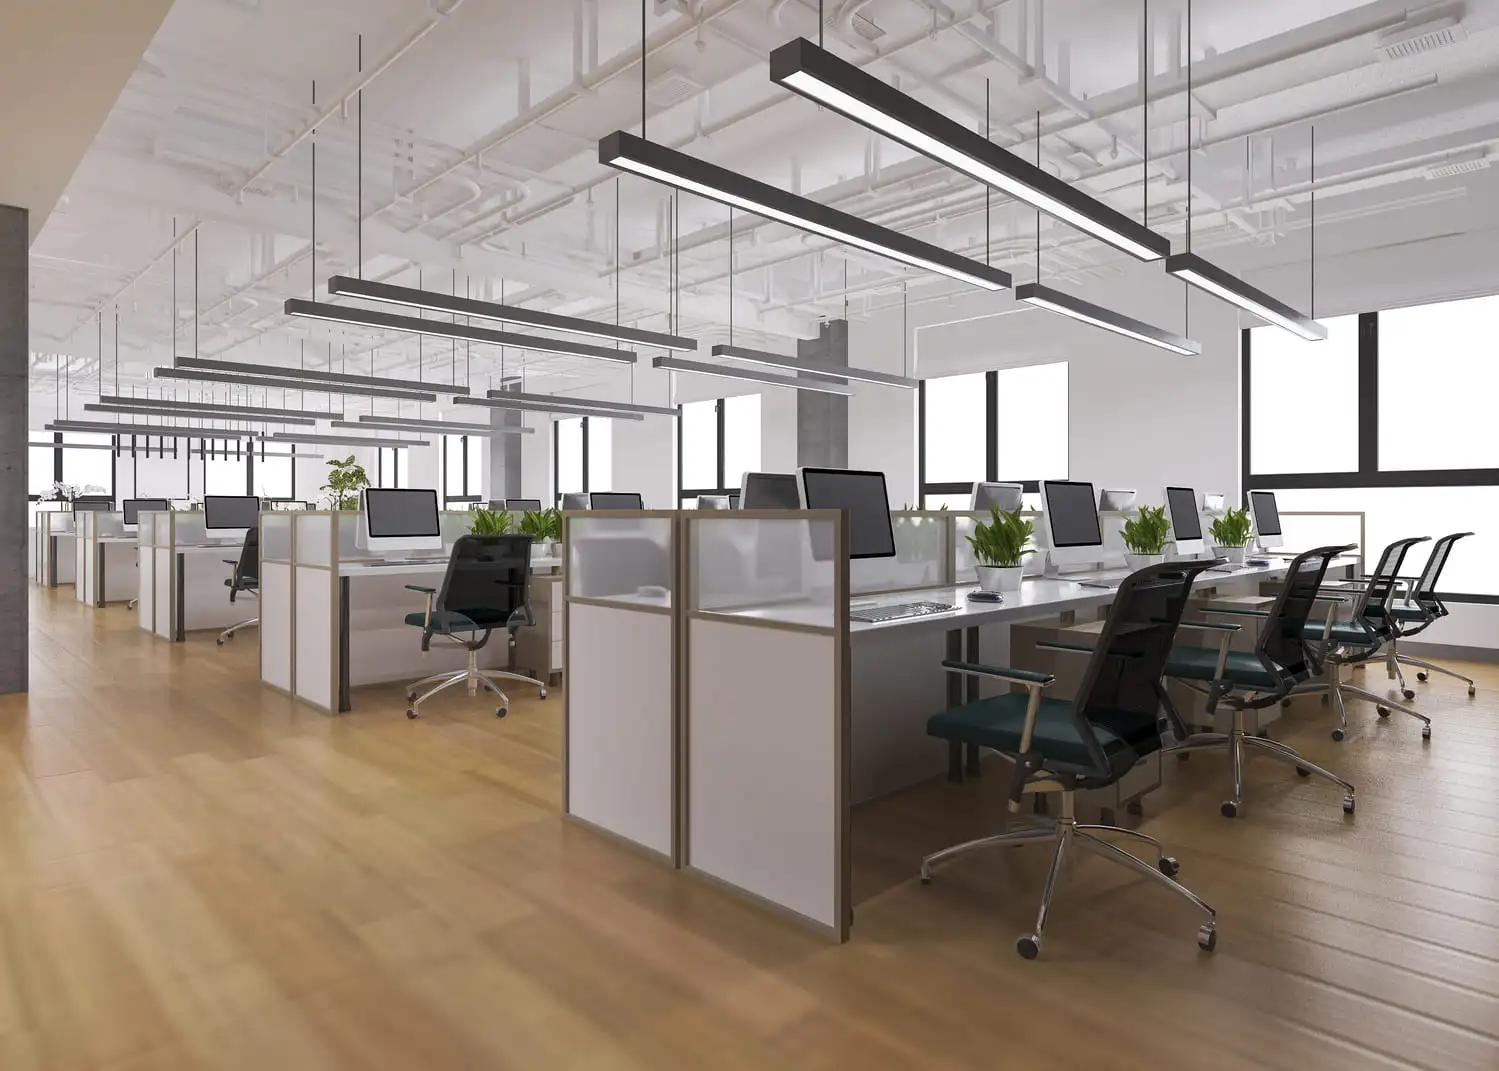 Premier fit out solutions in Dubai by RCi Red Chillies Interiors LLC, showcasing a modern office with sleek workstations, ergonomic chairs, and ample natural light, designed for maximum productivity and comfort